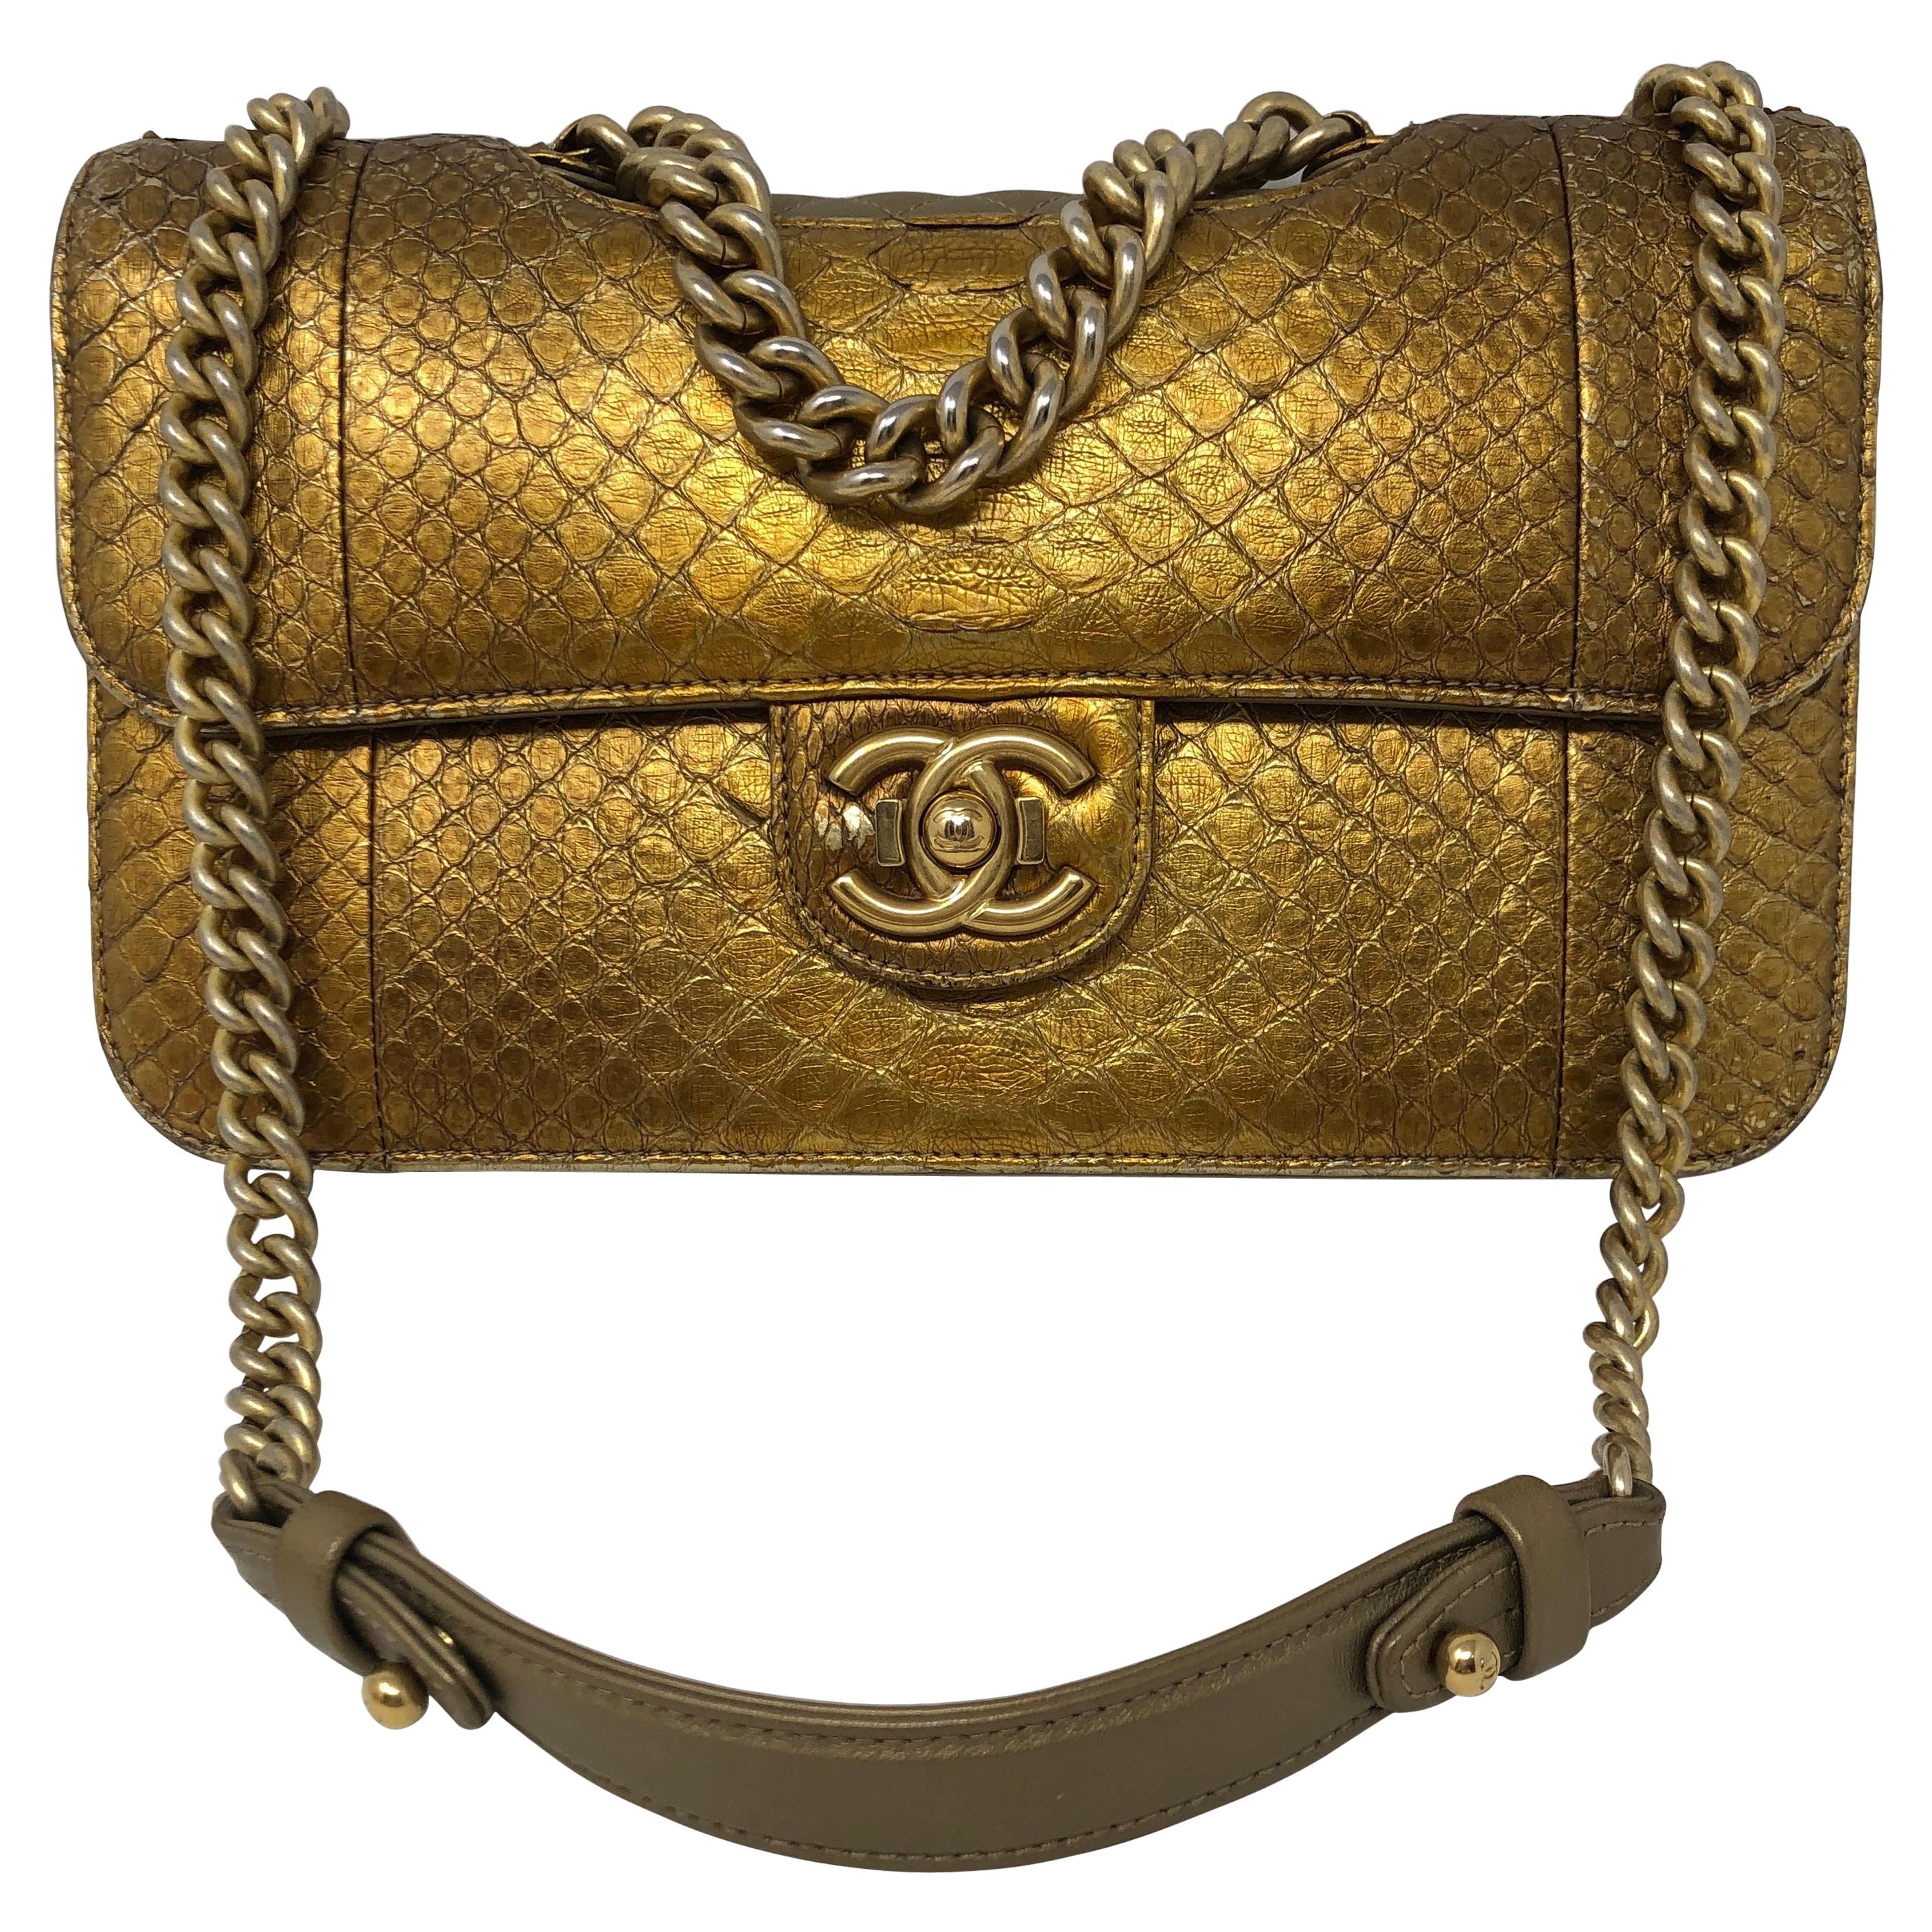 Sold at Auction: Chanel Black Suede and Gold Python Double Flap Bag